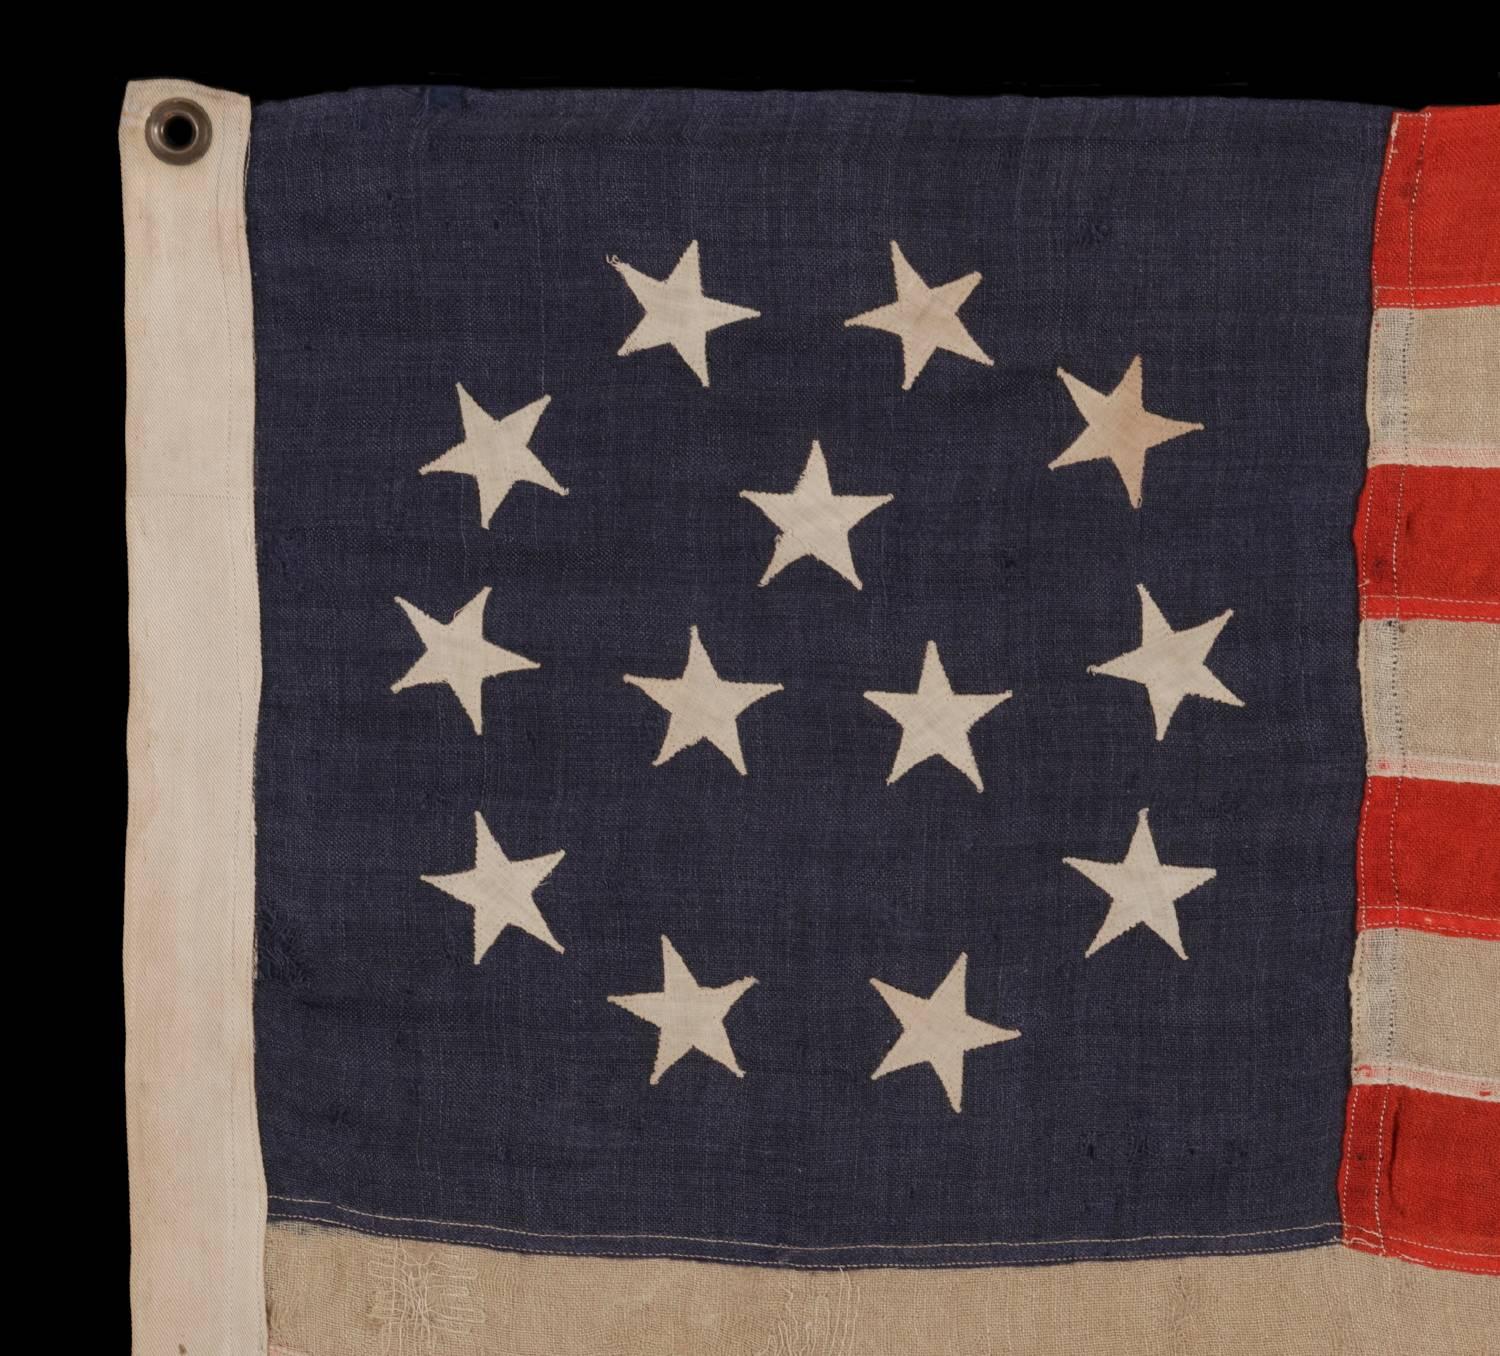 American Extremely Rare 13 Star Flag with Stars in Wreath Pattern with Three Center Star